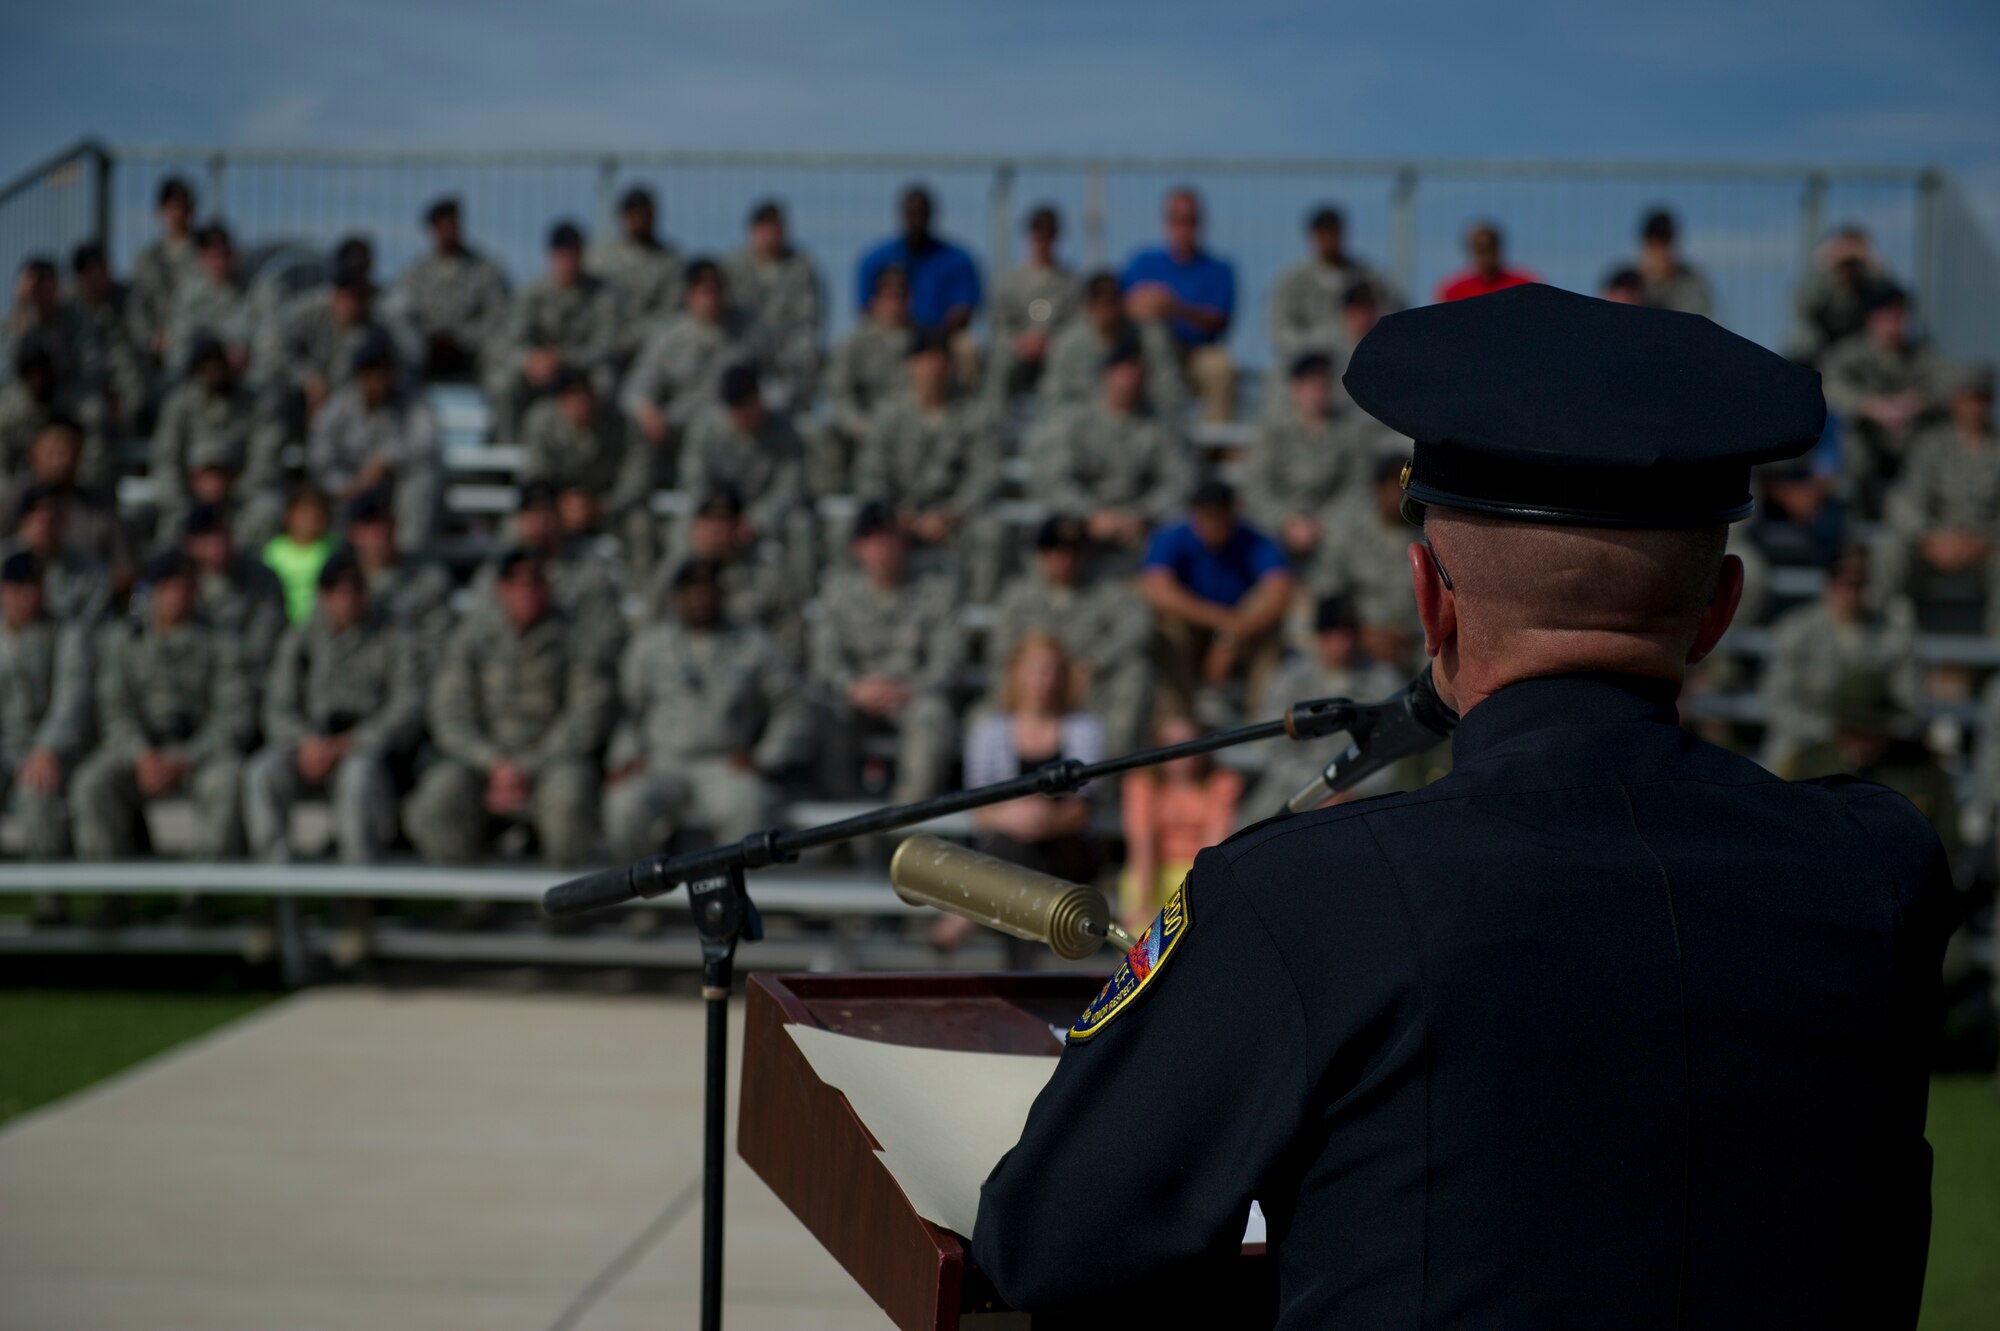 Robert Duncan, Alamogordo Chief of Police delivers a speech during the Police Week closing ceremony at Holloman Air Force Base, N.M., May 16. According to the National Police Week website, President John F.  Kennedy signed a proclamation in 1962 that designated May 15 as Peace Officers Memorial Day and the week in which that date falls as National Police Week. Since the inception of National Police Week, the United States Air Force has lost 120 military and civilian law enforcement officers. (U.S. Air Force photo by Airman 1st Class Aaron Montoya / Released)